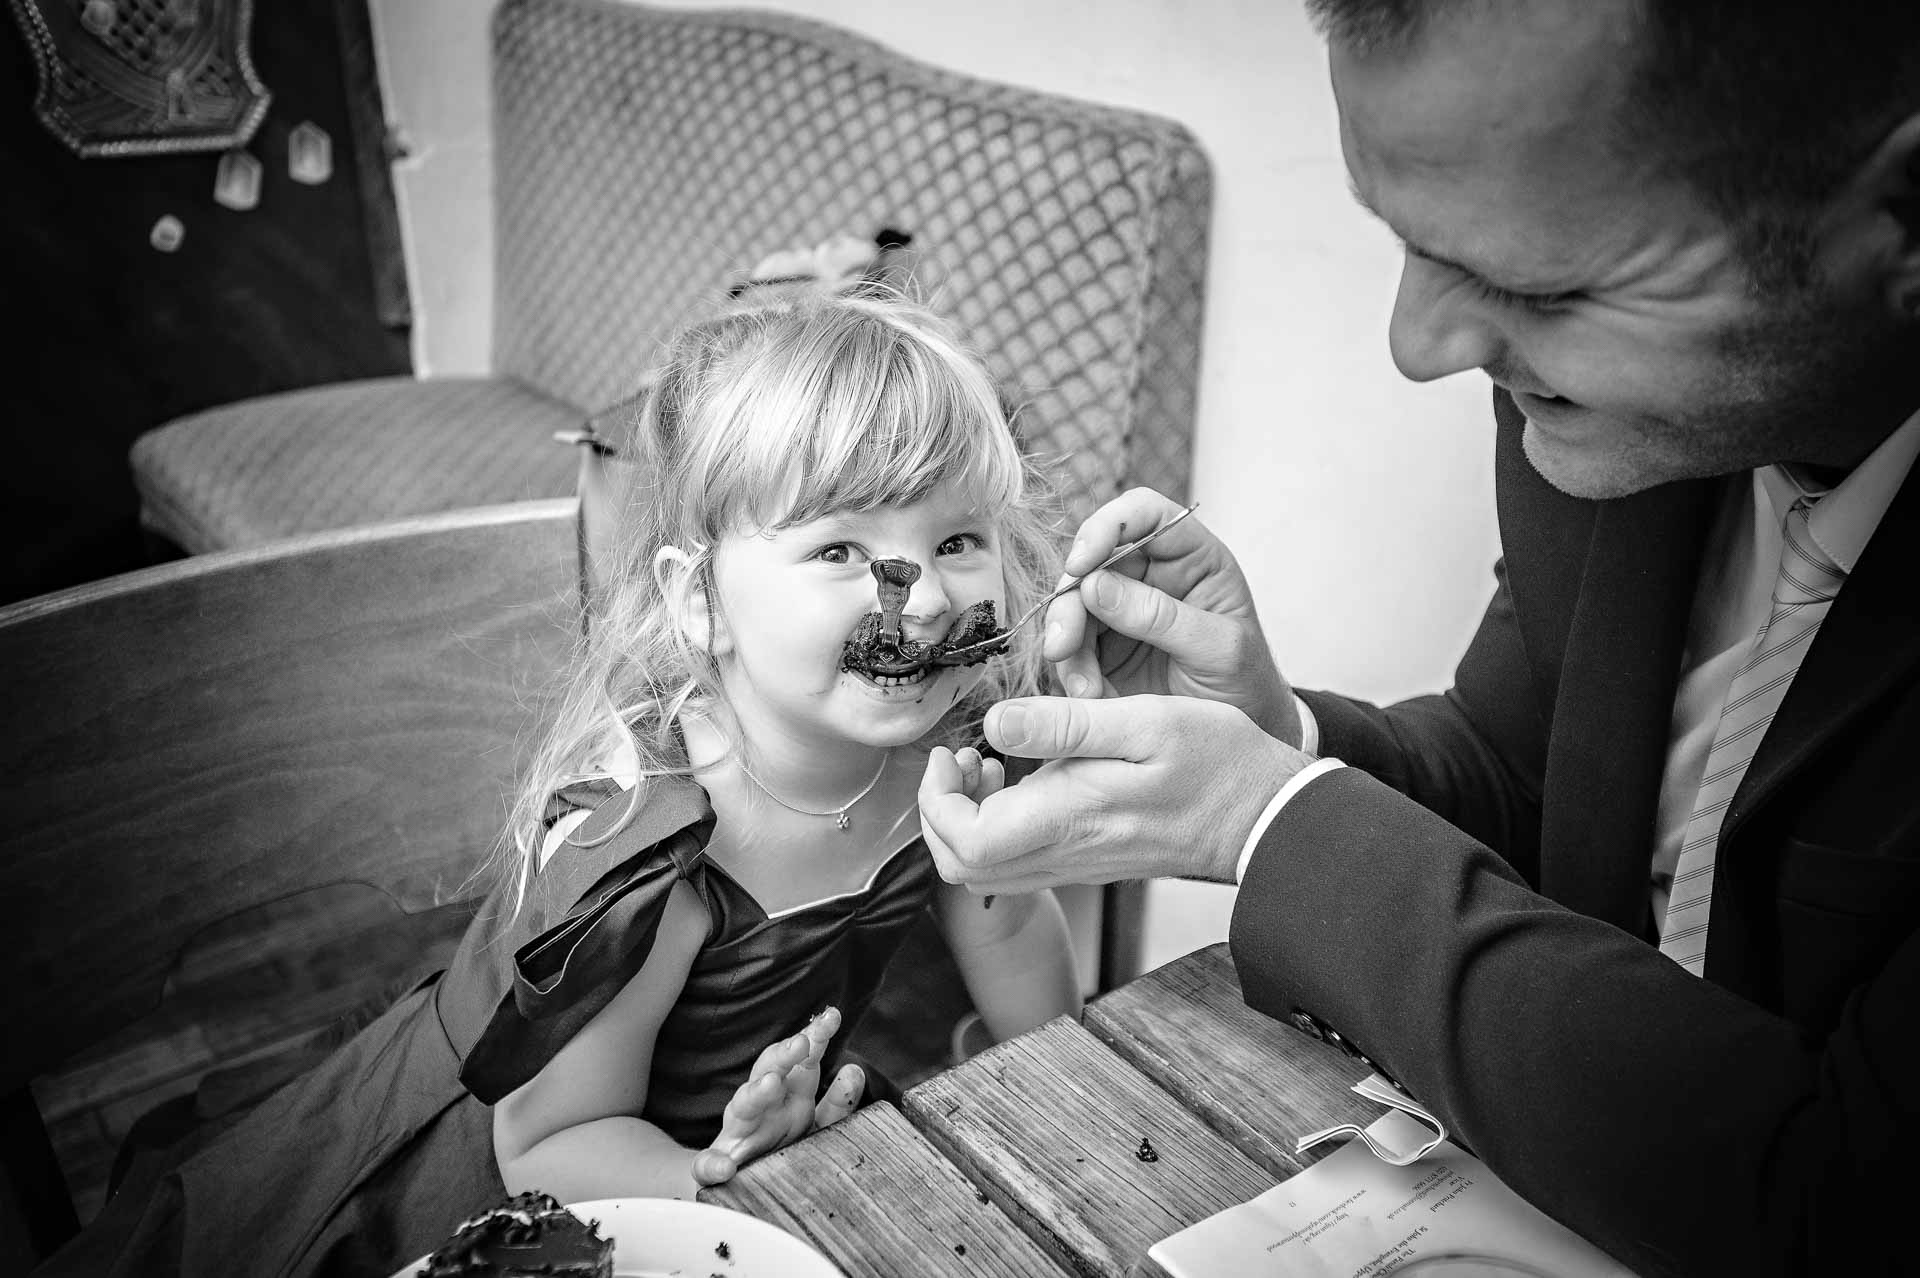 Little girl with two spoons in mouth being fed by dad at wedding meal